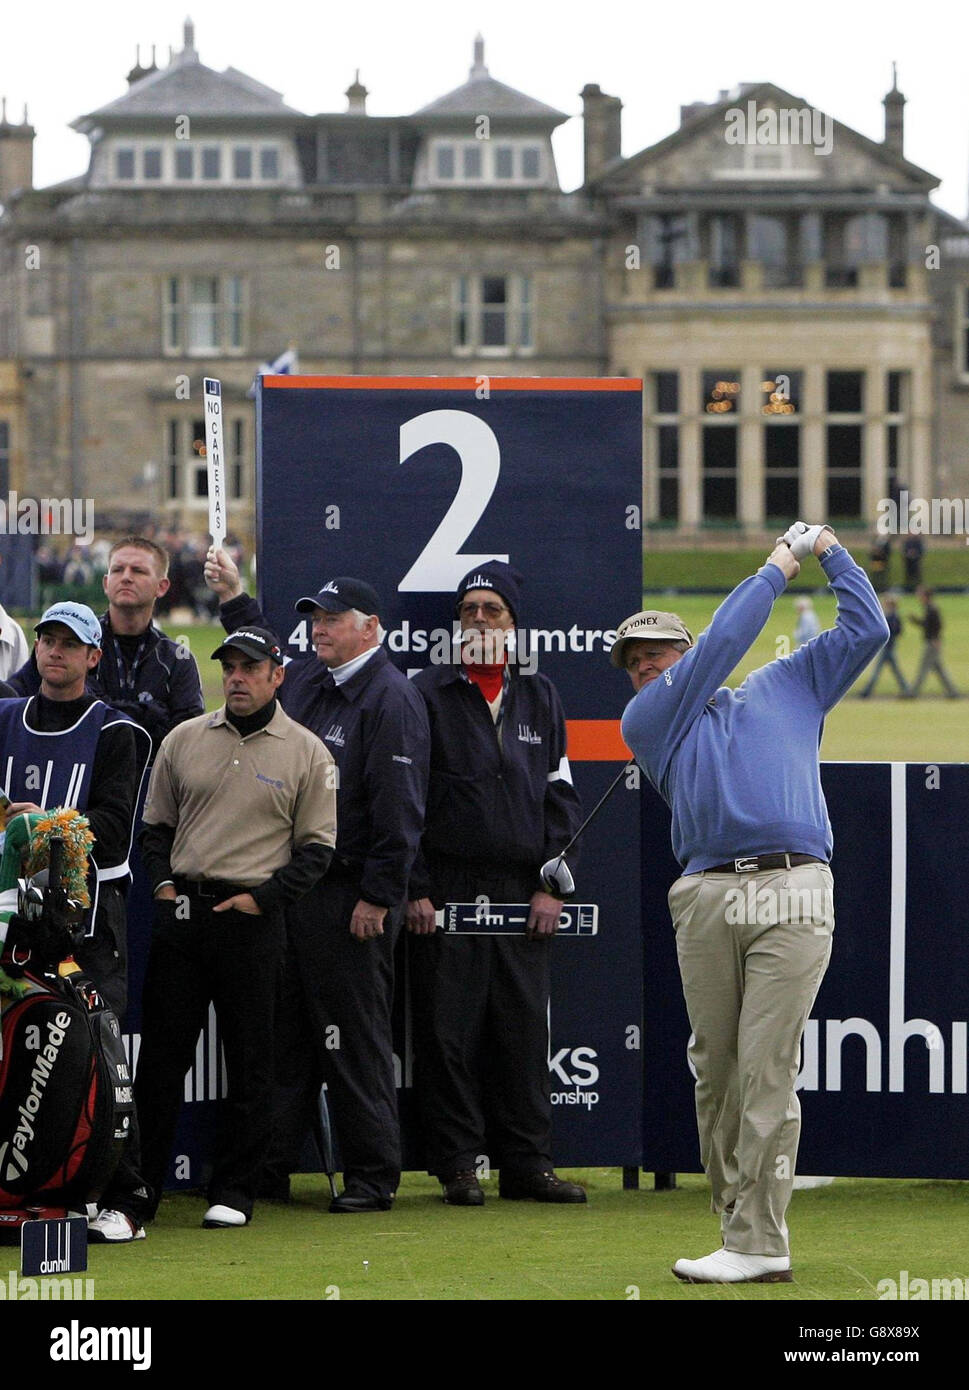 Scotland's Colin Montgomerie tees off at the second hole during the second round of the Dunhill Links Championships at St Andrews Golf Course, Fife, Scotland, Friday September 30, 2005. PRESS ASSOCIATION Photo. Photo credit should read: Andrew Milligan/PA. Stock Photo